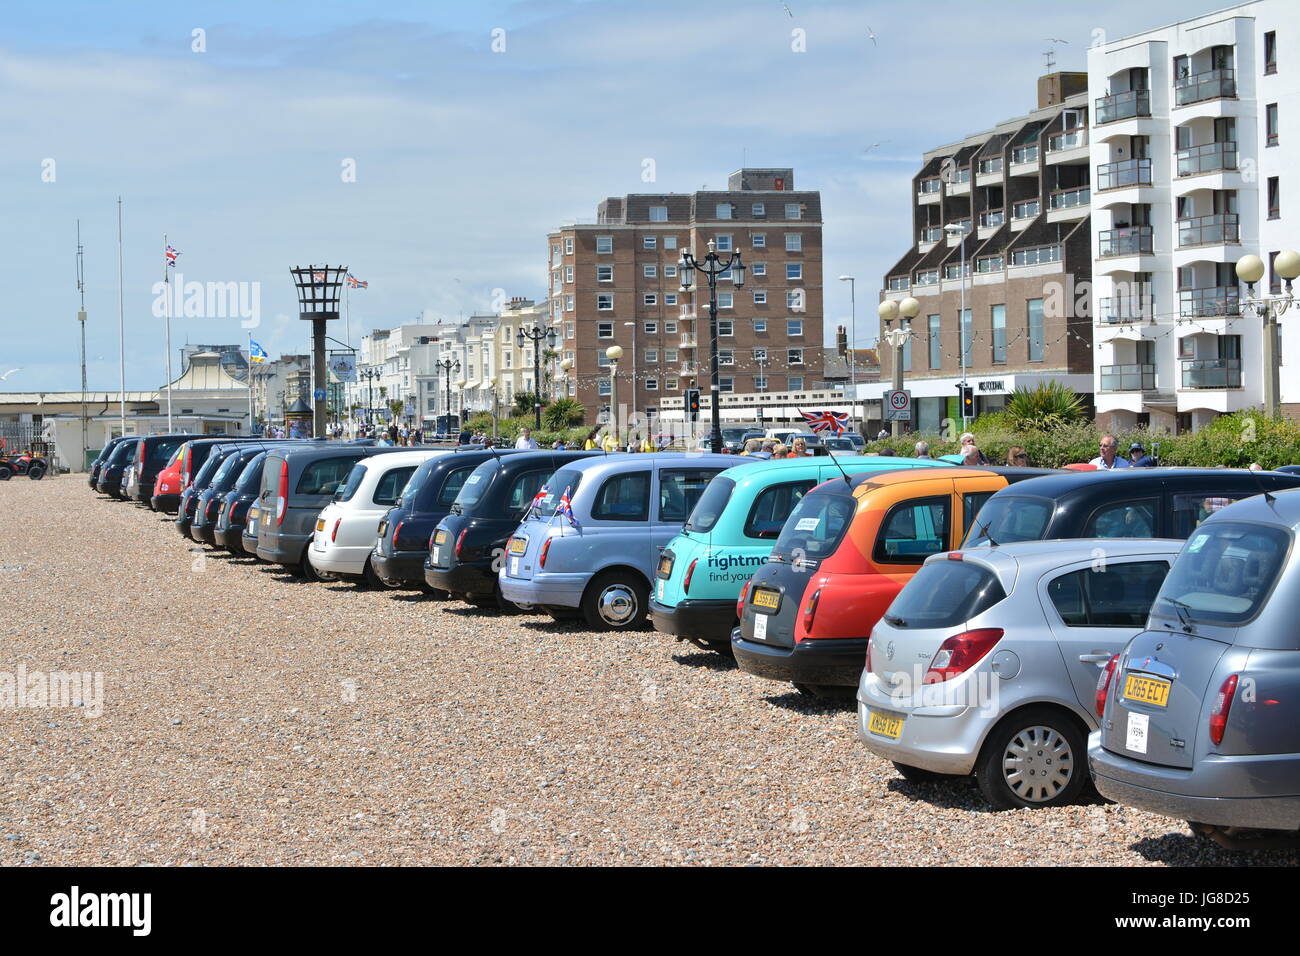 Worthing, West Sussex, England, UK. Tuesday 4th July 2017. London cab drivers bring 200 WWII veterans from across London to the seaside town of Worthing, West Sussex, UK today for a day in hot sunny weather by the sea. Credit: Geoff Smith / Alamy Live News Stock Photo